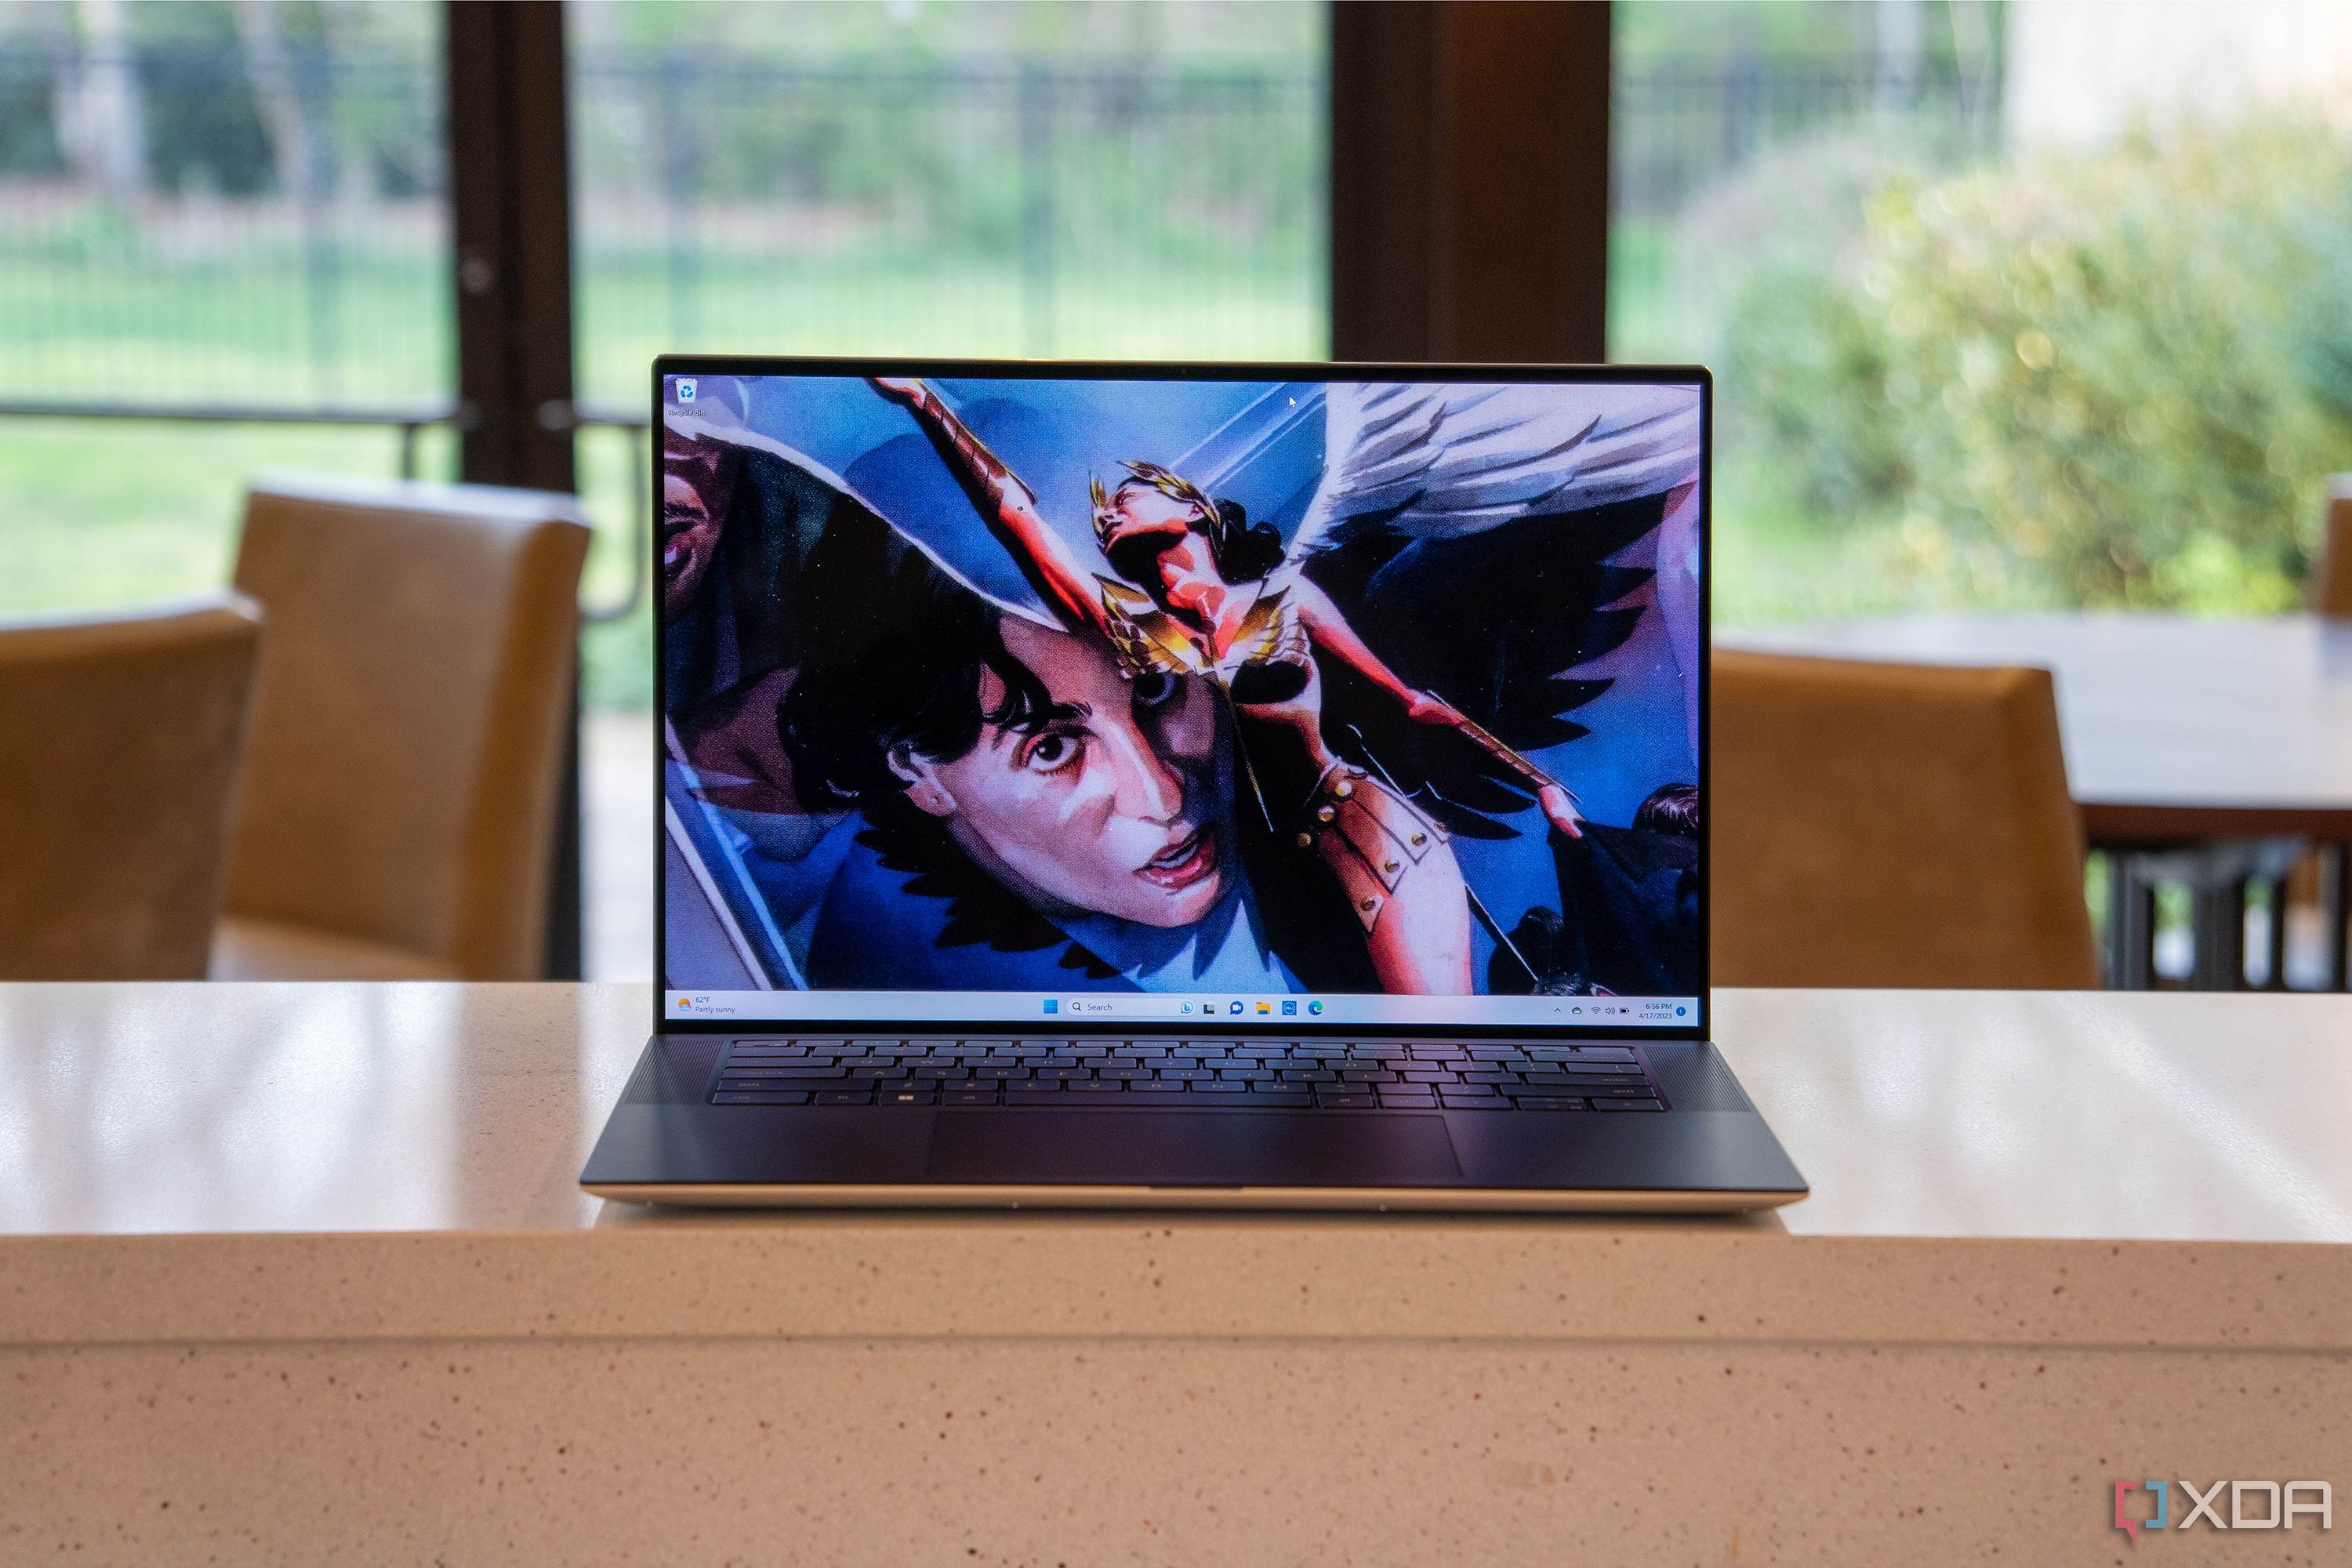 Front view of a laptop with a superhero on the screen